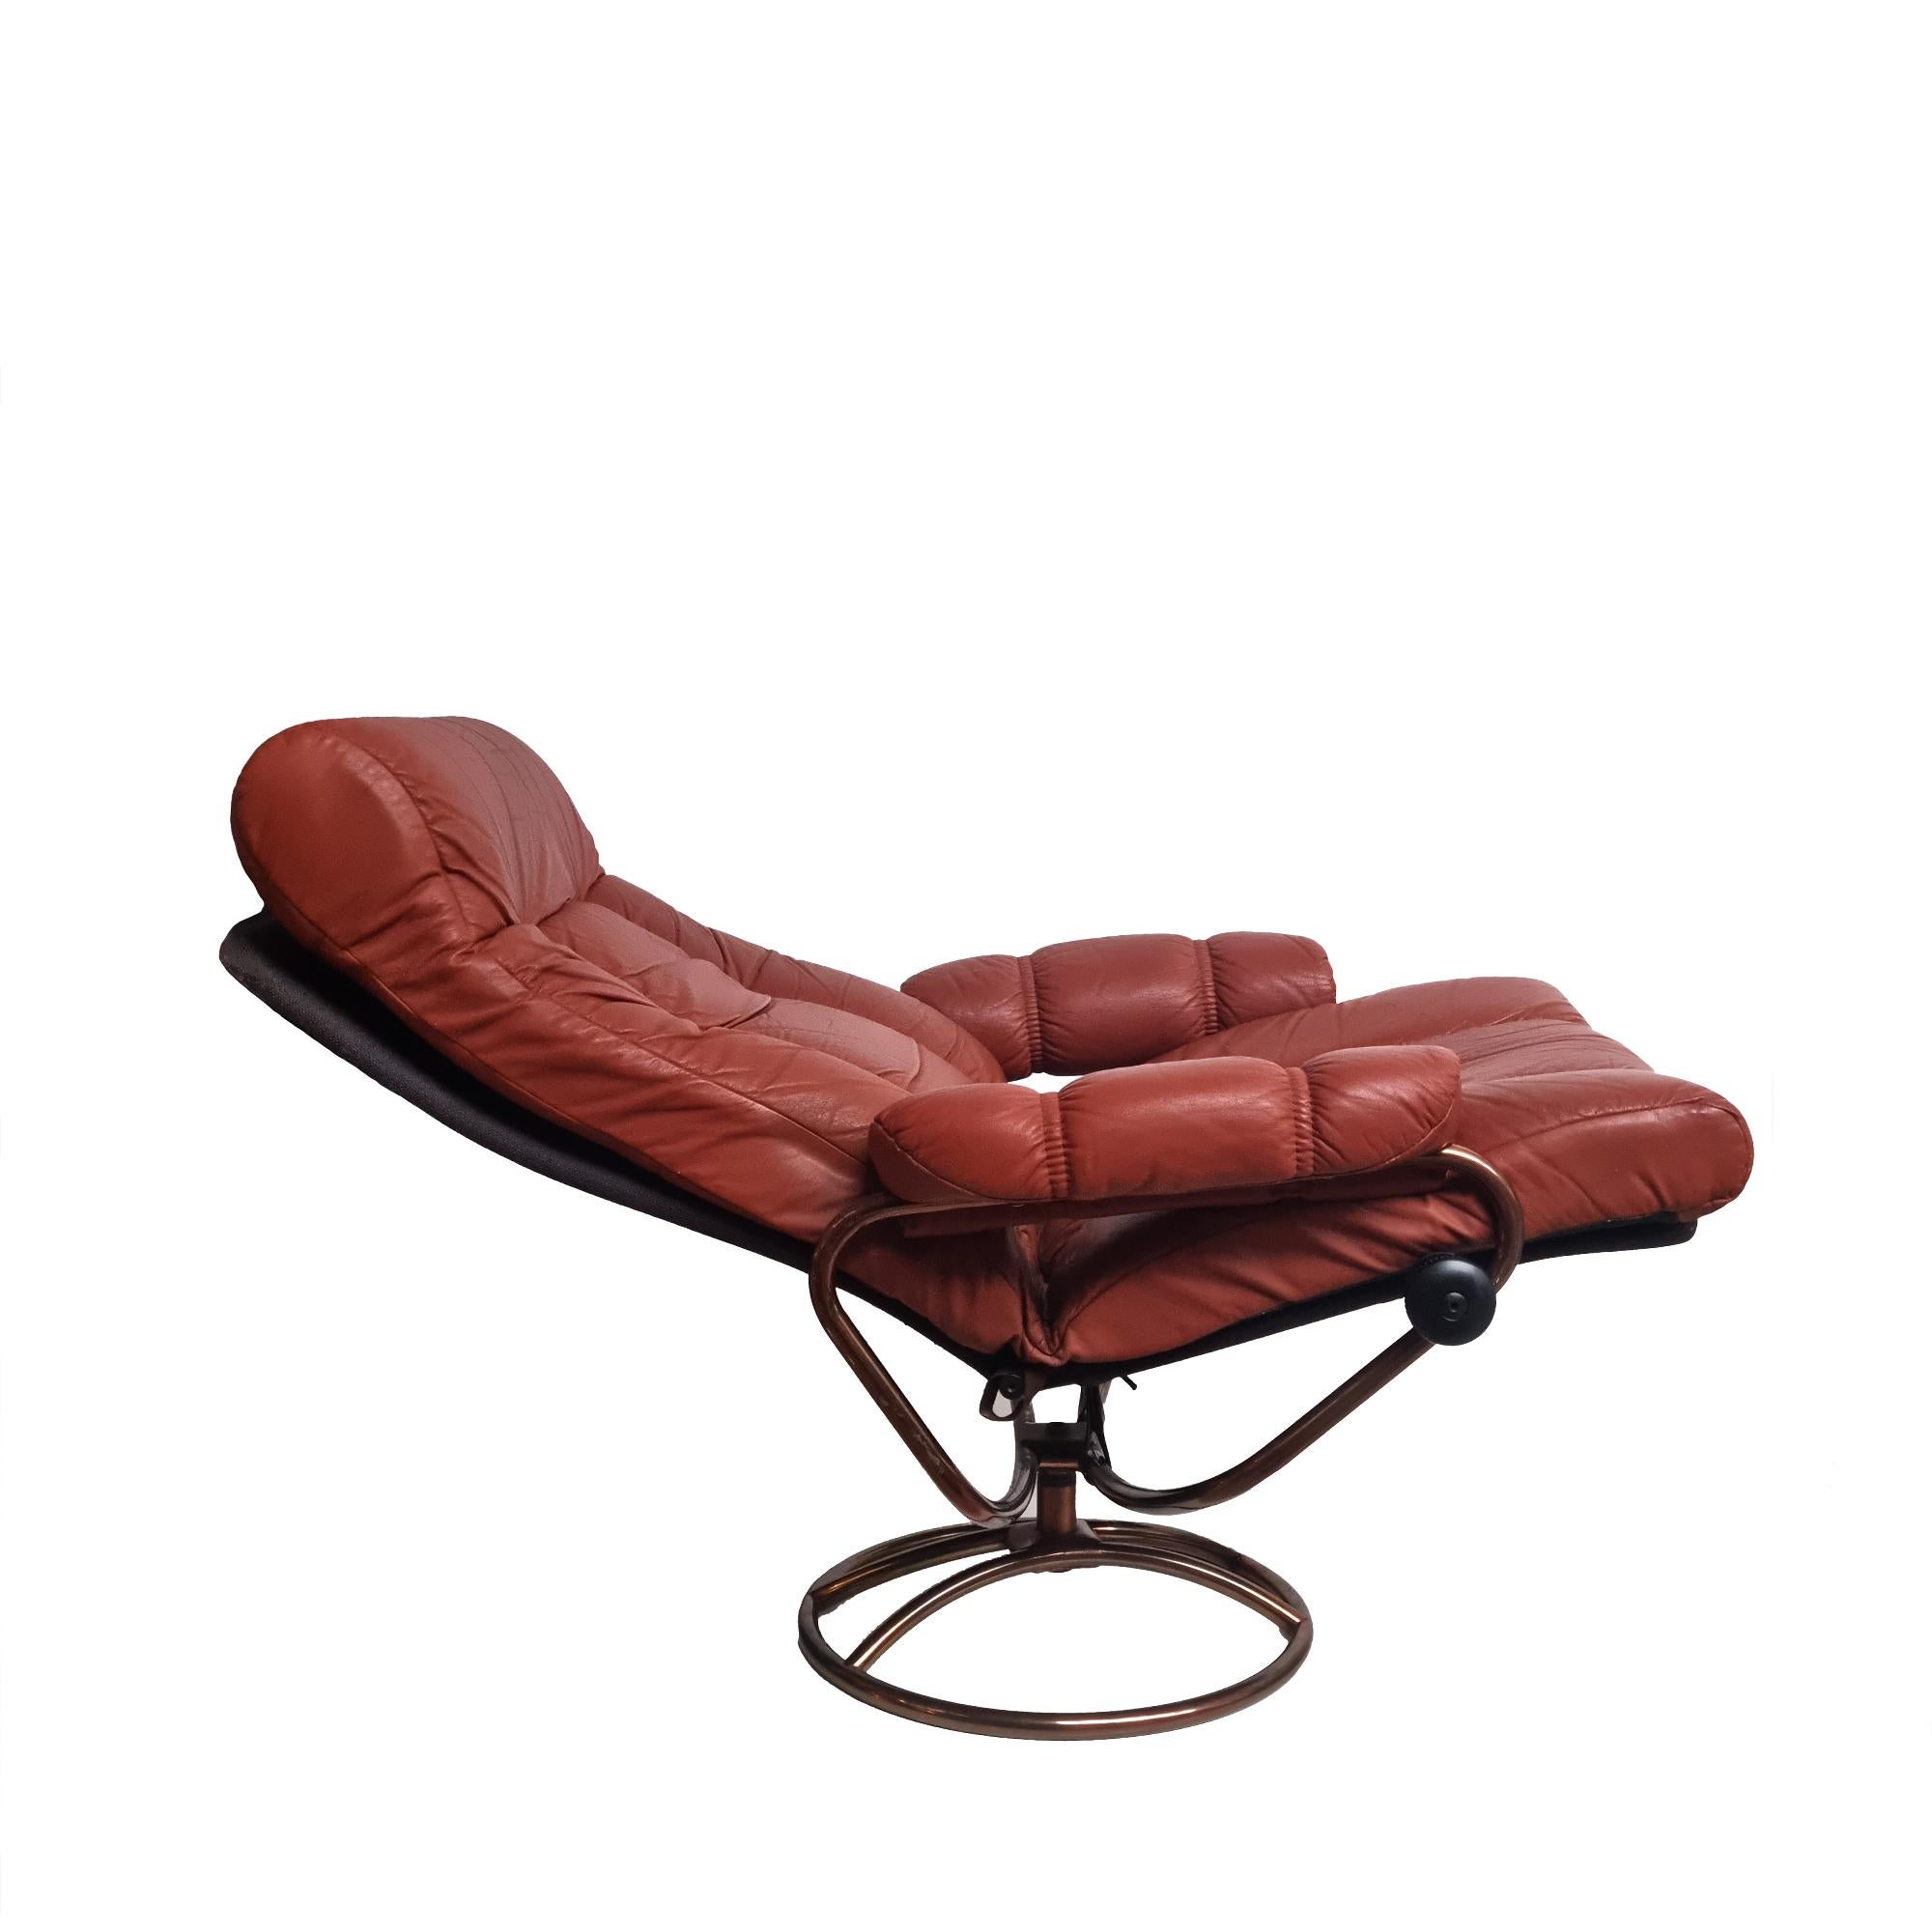 Stressless Norwegian swivel chair from the 1970s, in original vintage condition. Featuring original brown leather, a rounded base, and adjustable seats and backrests, this chair is crafted by the Danish company Ekornes as part of their Stressless